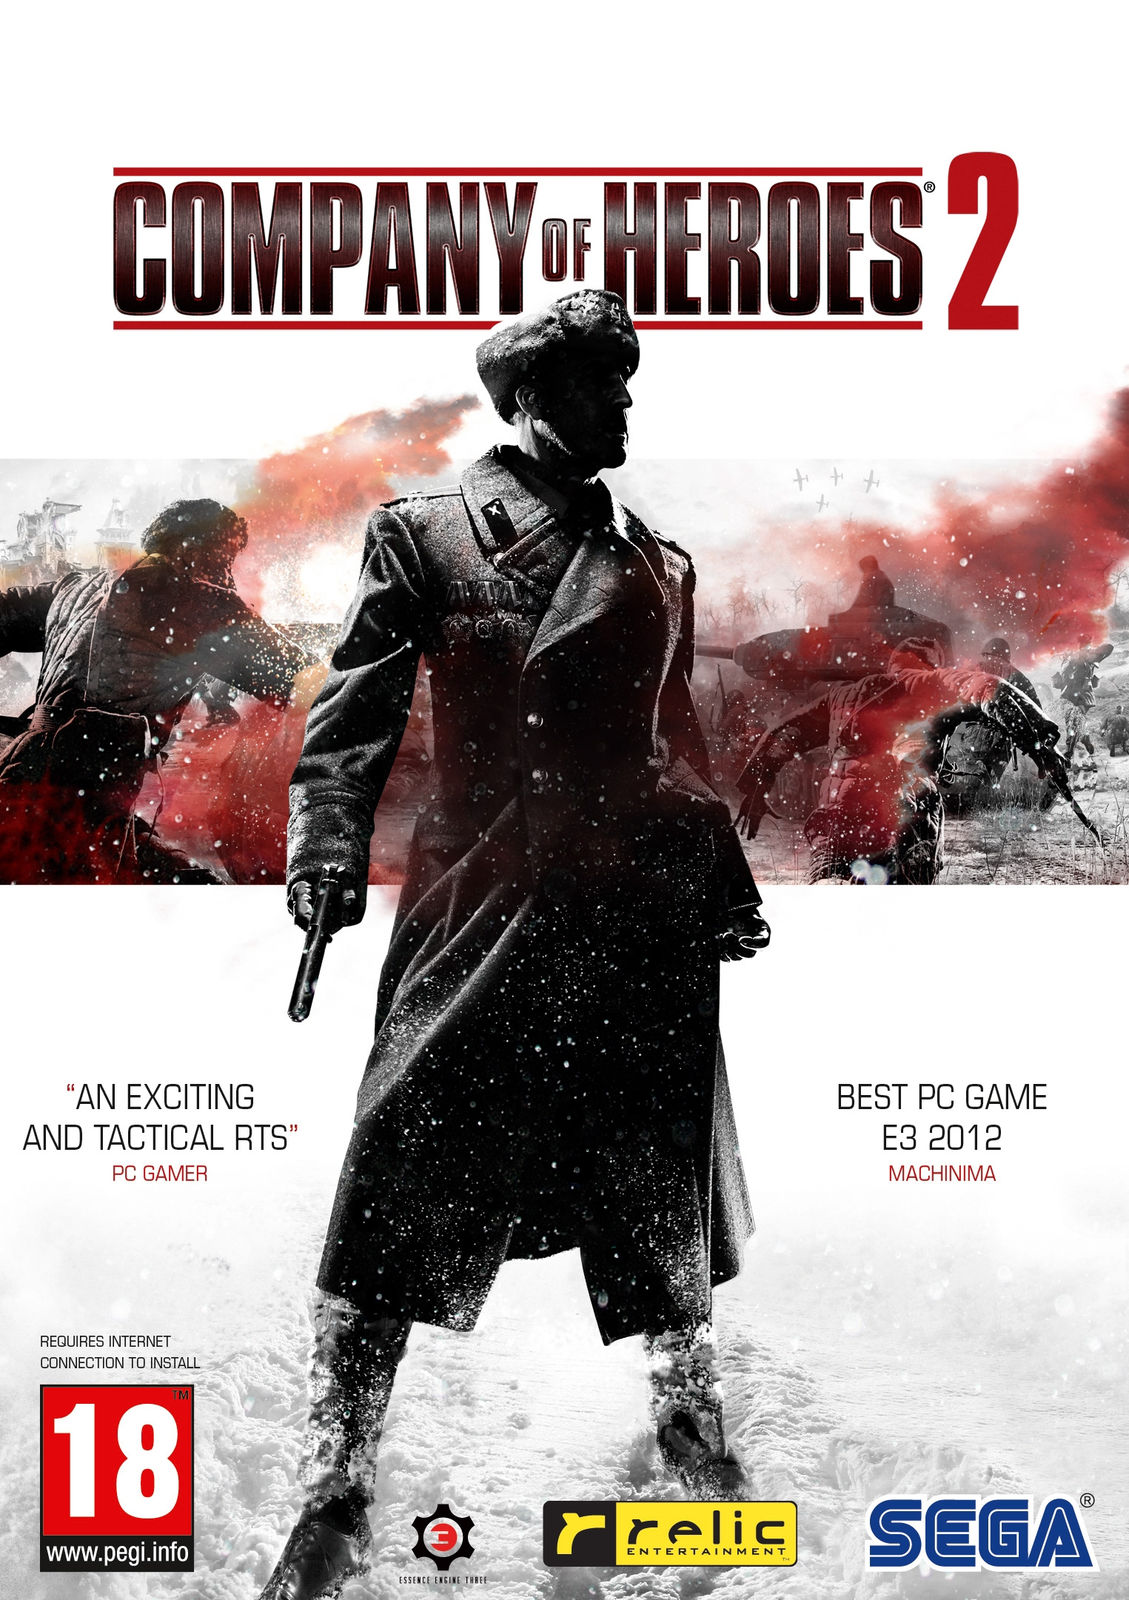 COMPANY OF HEROES 2 (STEAM) INSTANTLY + GIFT